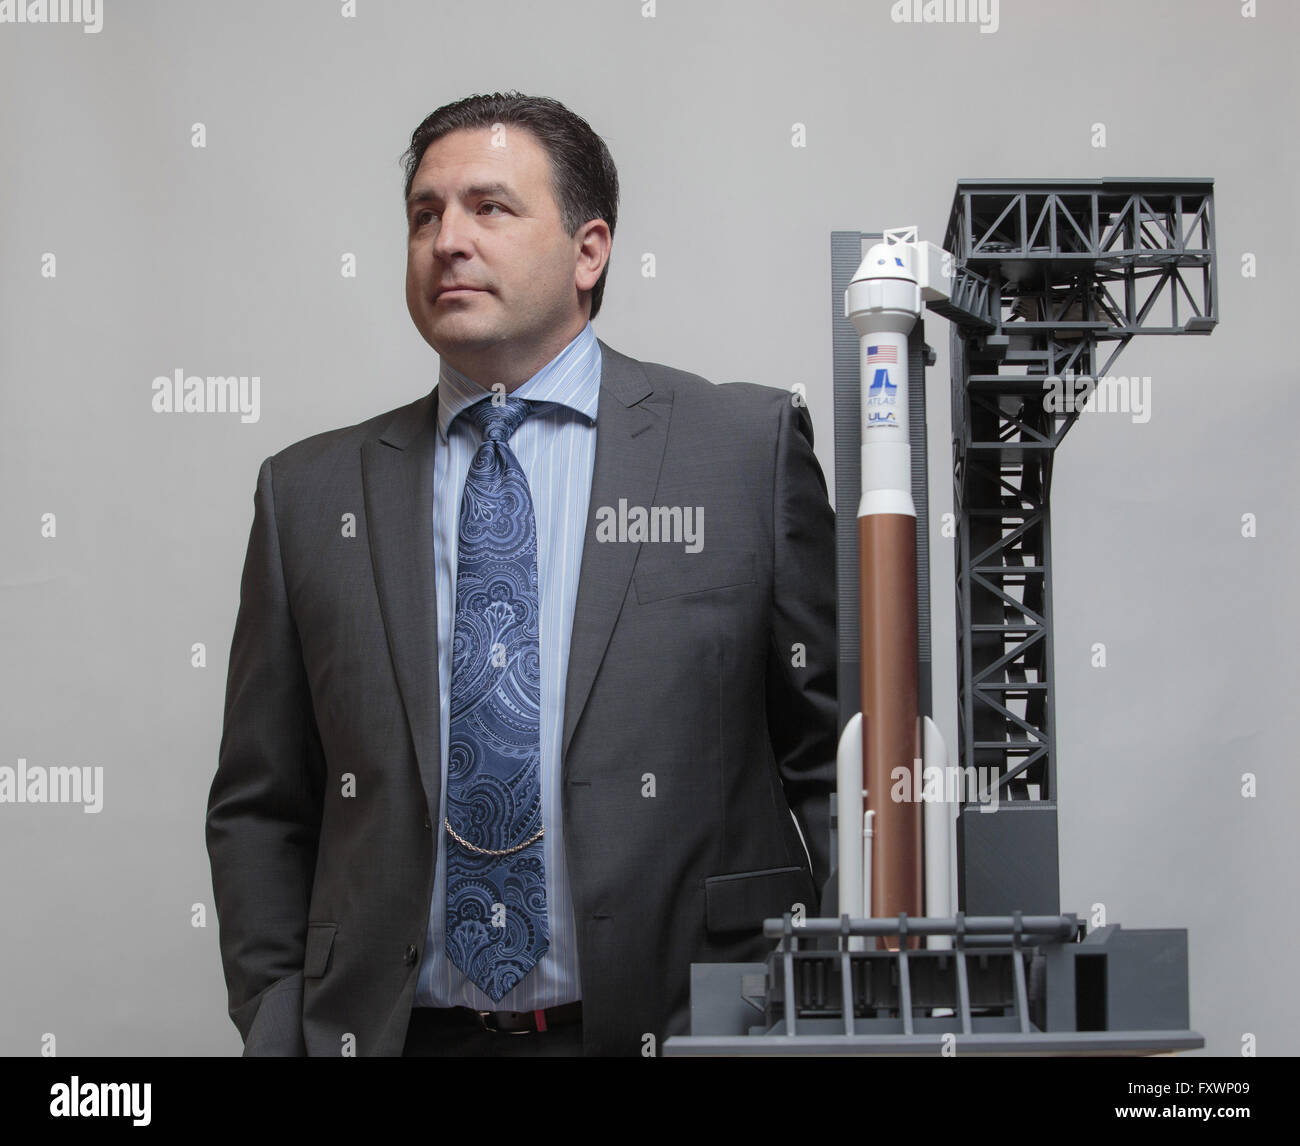 Colorado Springs, Colorado, USA. 12th Apr, 2016. Gary L. Wentz is vice president, Human Launch Services for United Launch Alliance (ULA) stands for a photograph with a model of the Atlas V at the 32nd Space Symposium in Colorado Springs, Colorado, U.S., on Tuesday, April 12, 2016. © Matthew Staver/ZUMA Wire/Alamy Live News Stock Photo